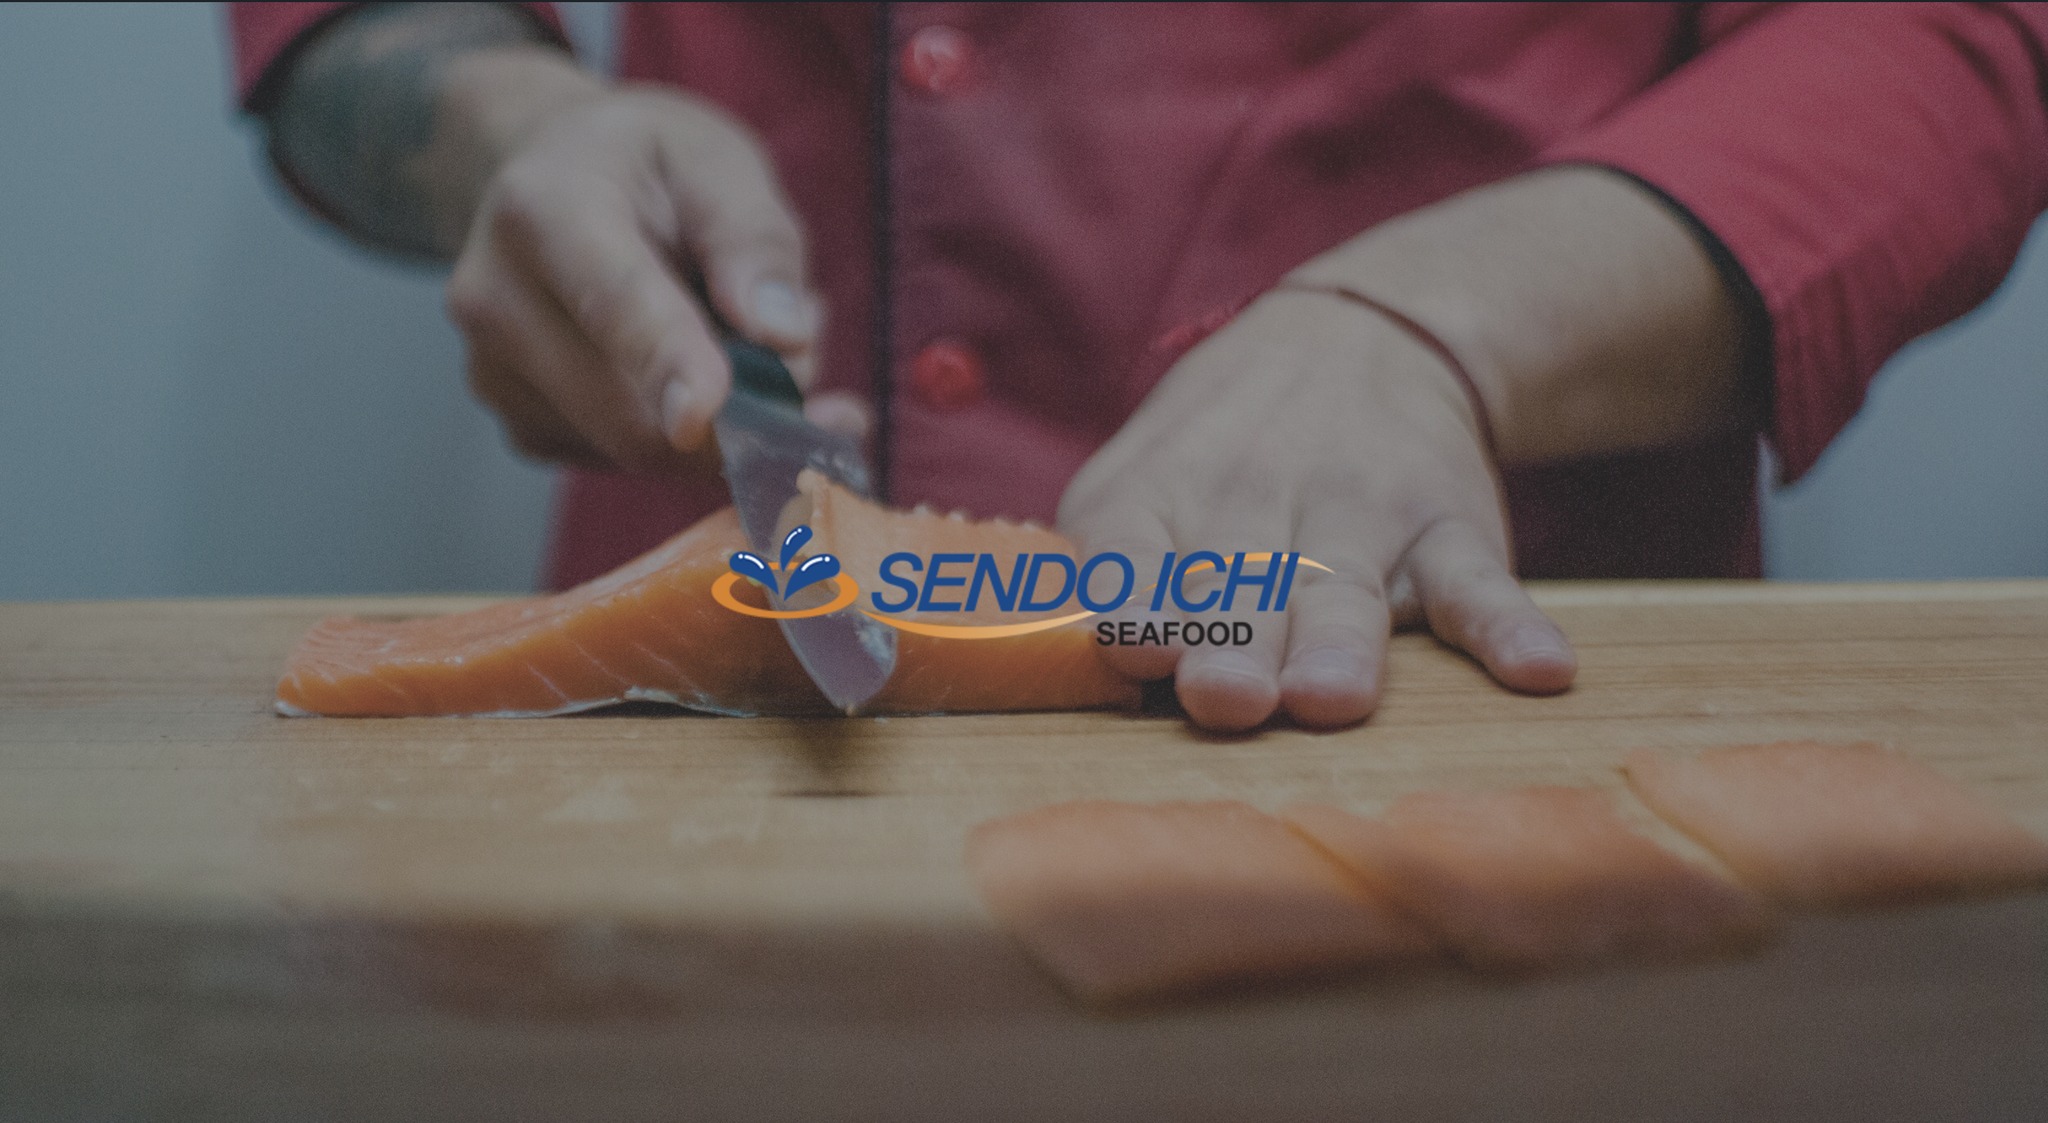 Sendo Ichi Seafood | We moved to a New Website!